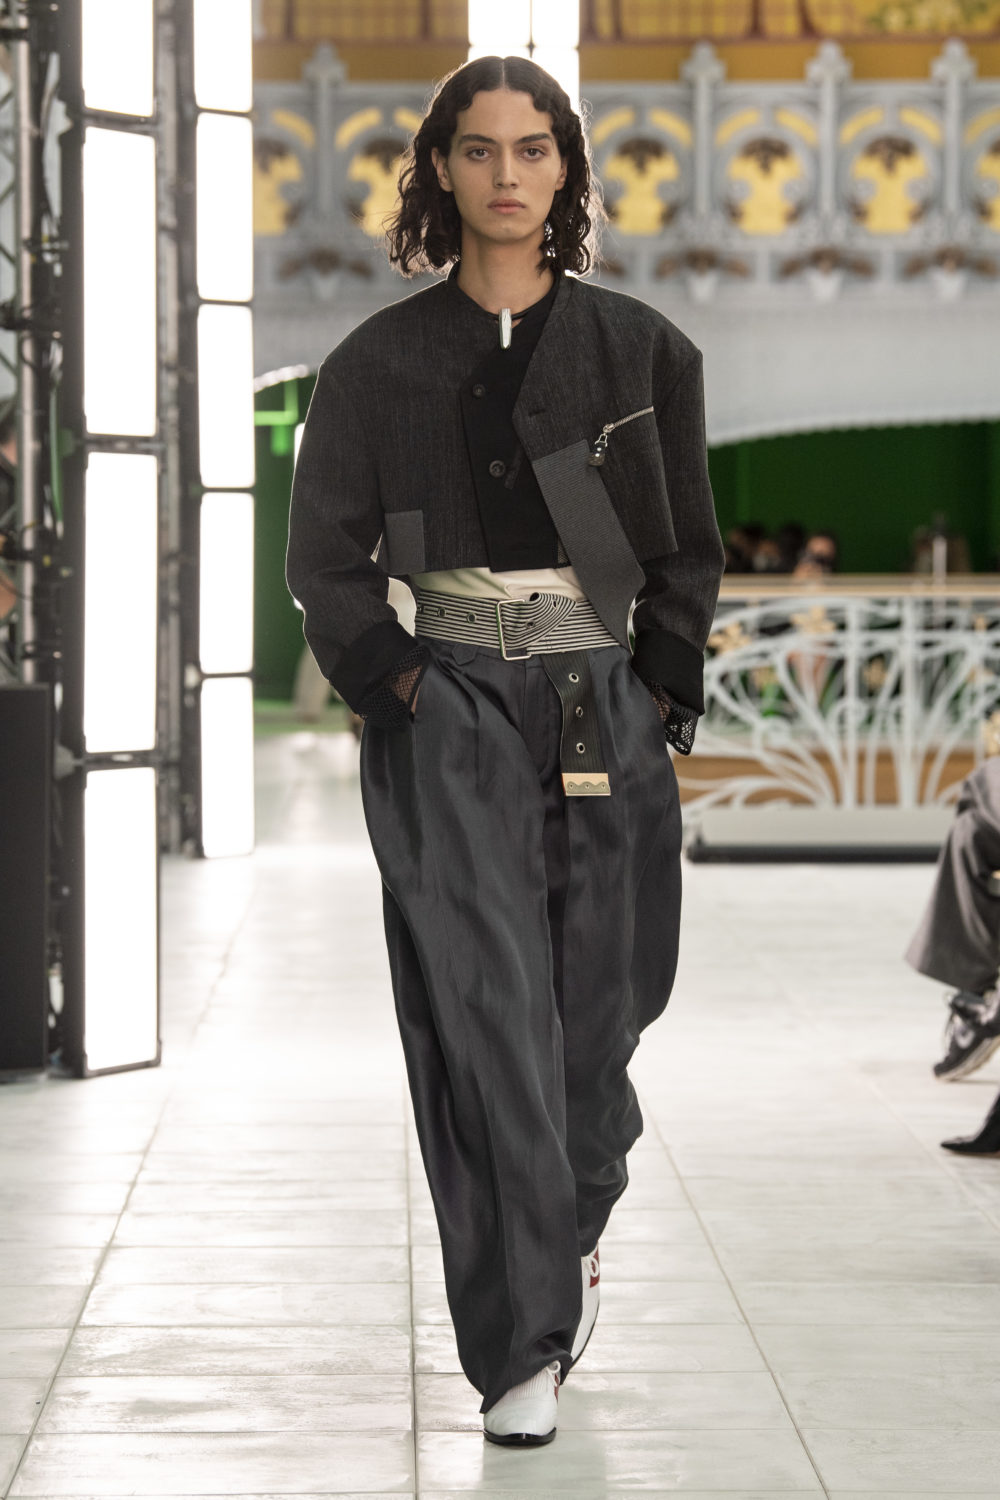 Louis Vuitton Women's Spring-Summer 2021 Fashion Show, #LVSS21 Stepping  into a territory that is still stylistically vague. With his latest # LouisVuitton collection, Nicolas Ghesquière ventures into a zone